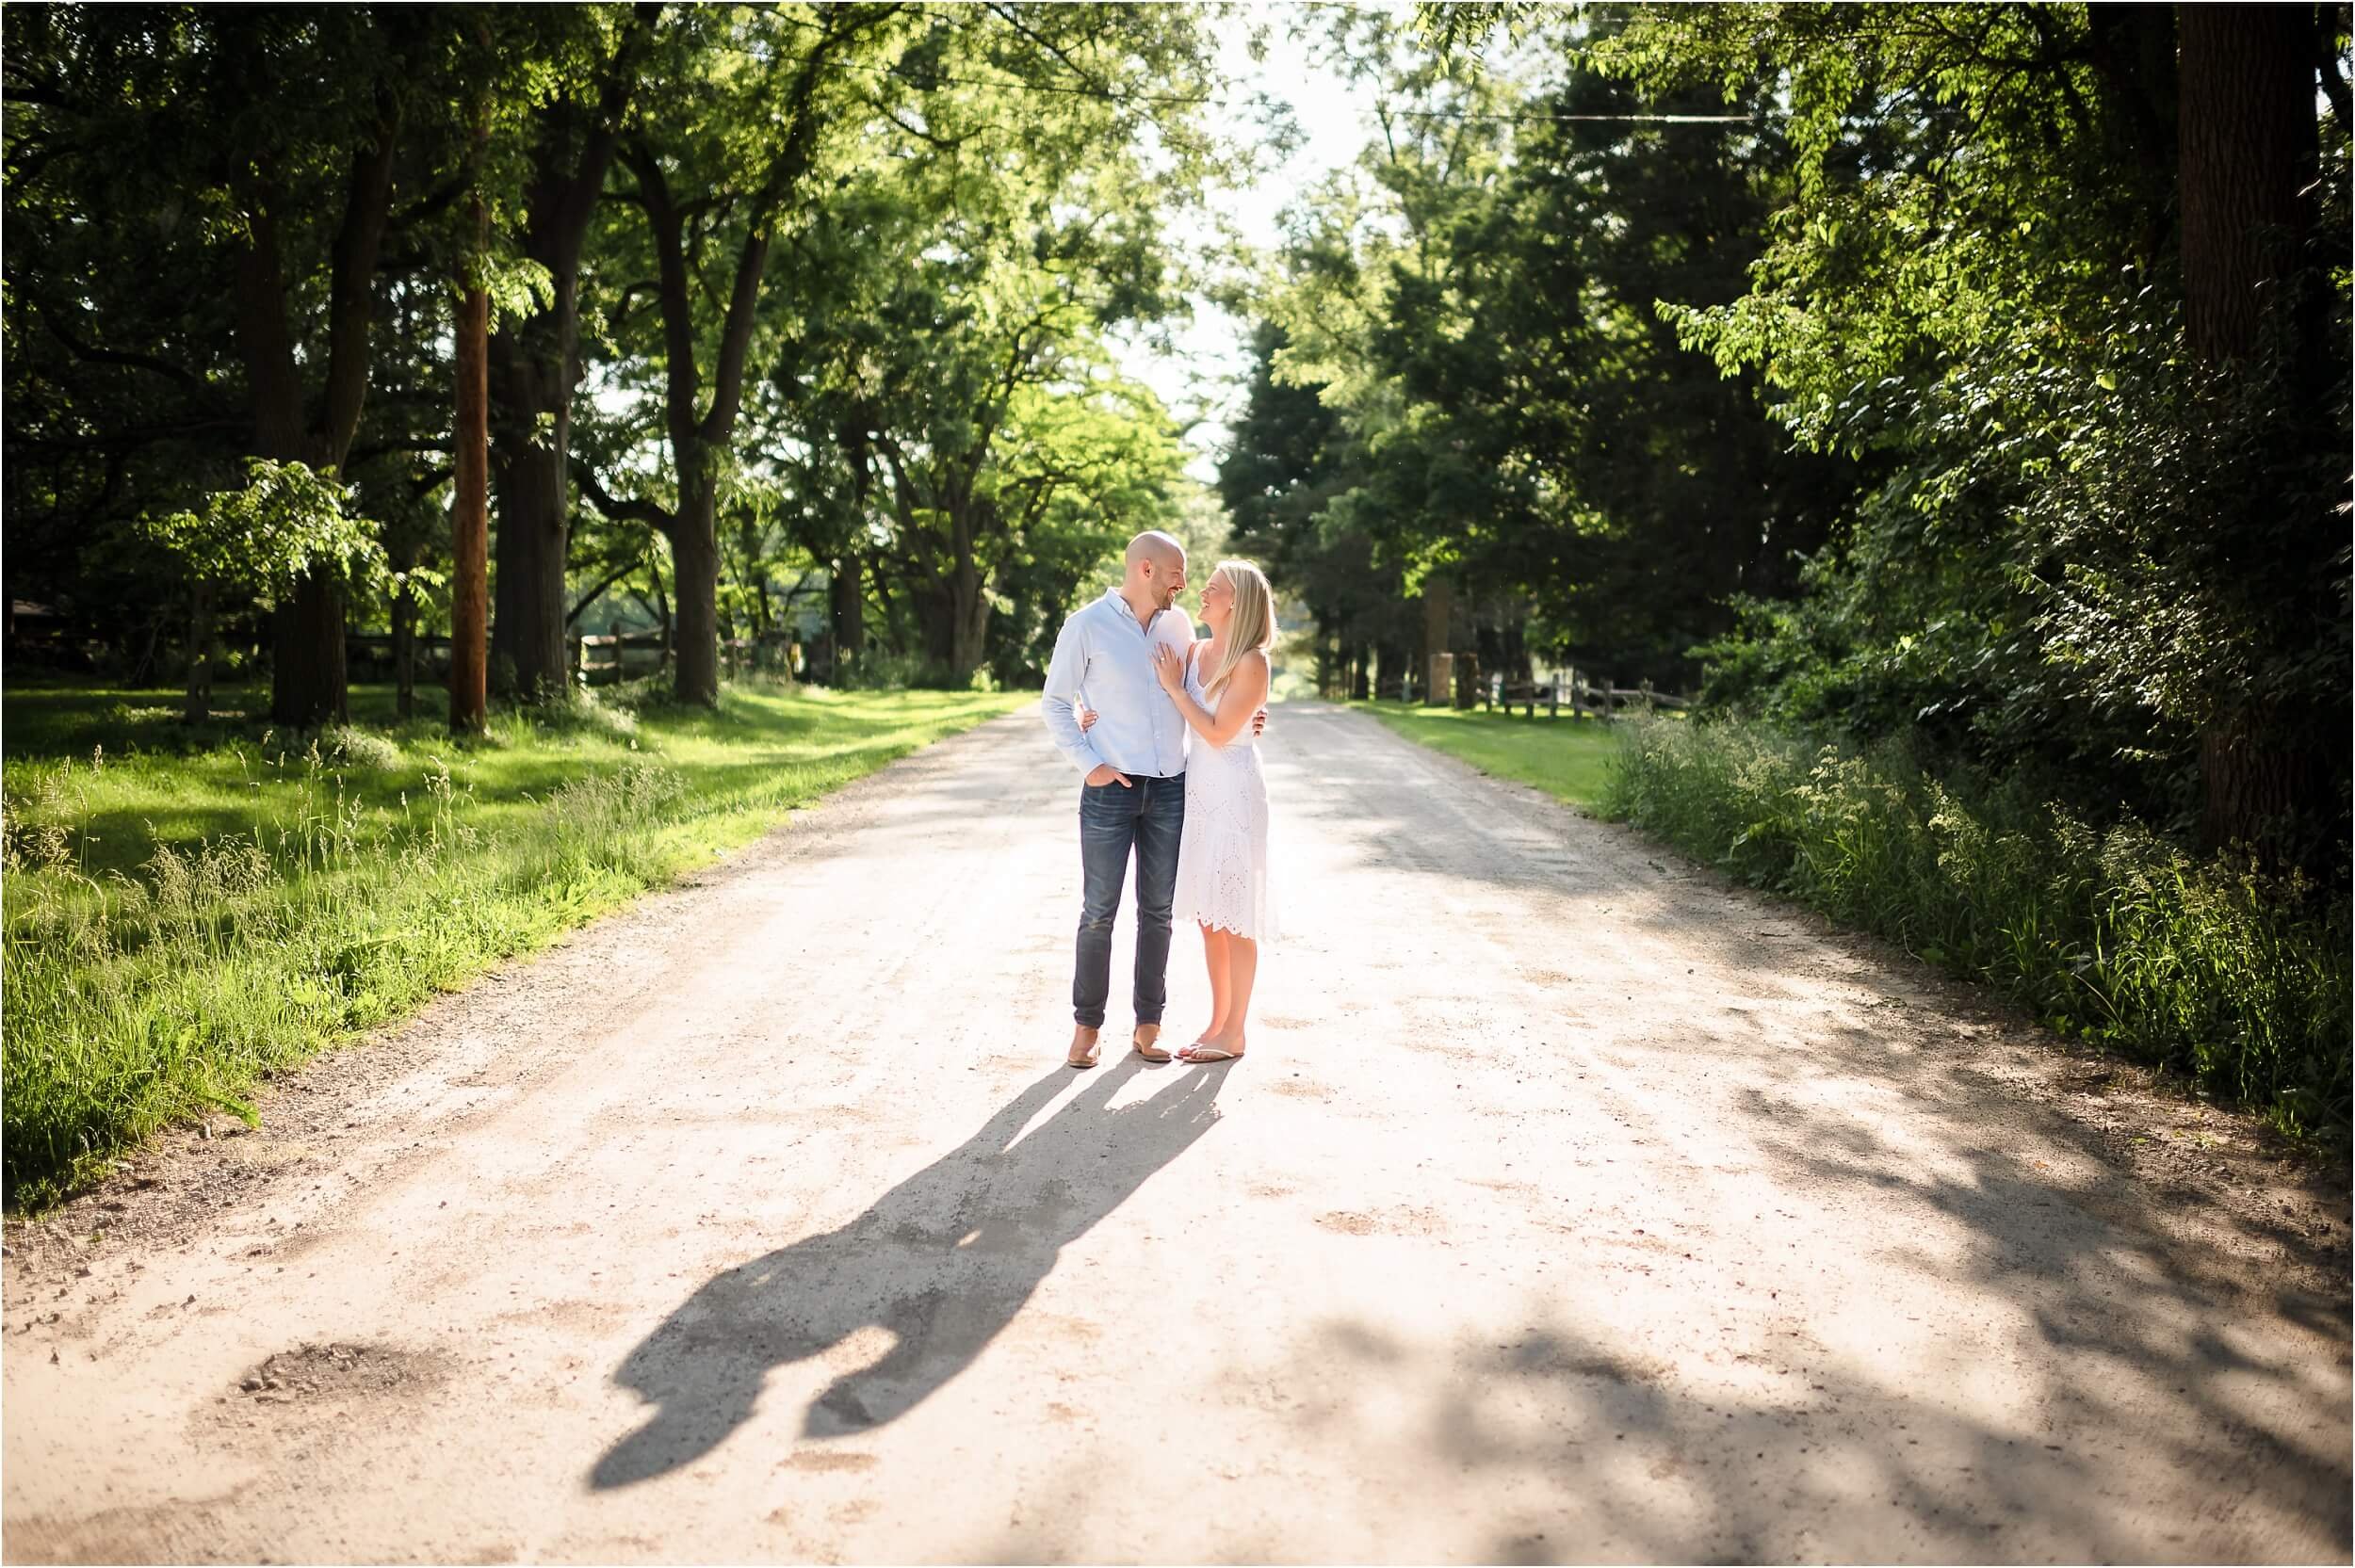  A couple walks down a dirt road during their June engagement session.  